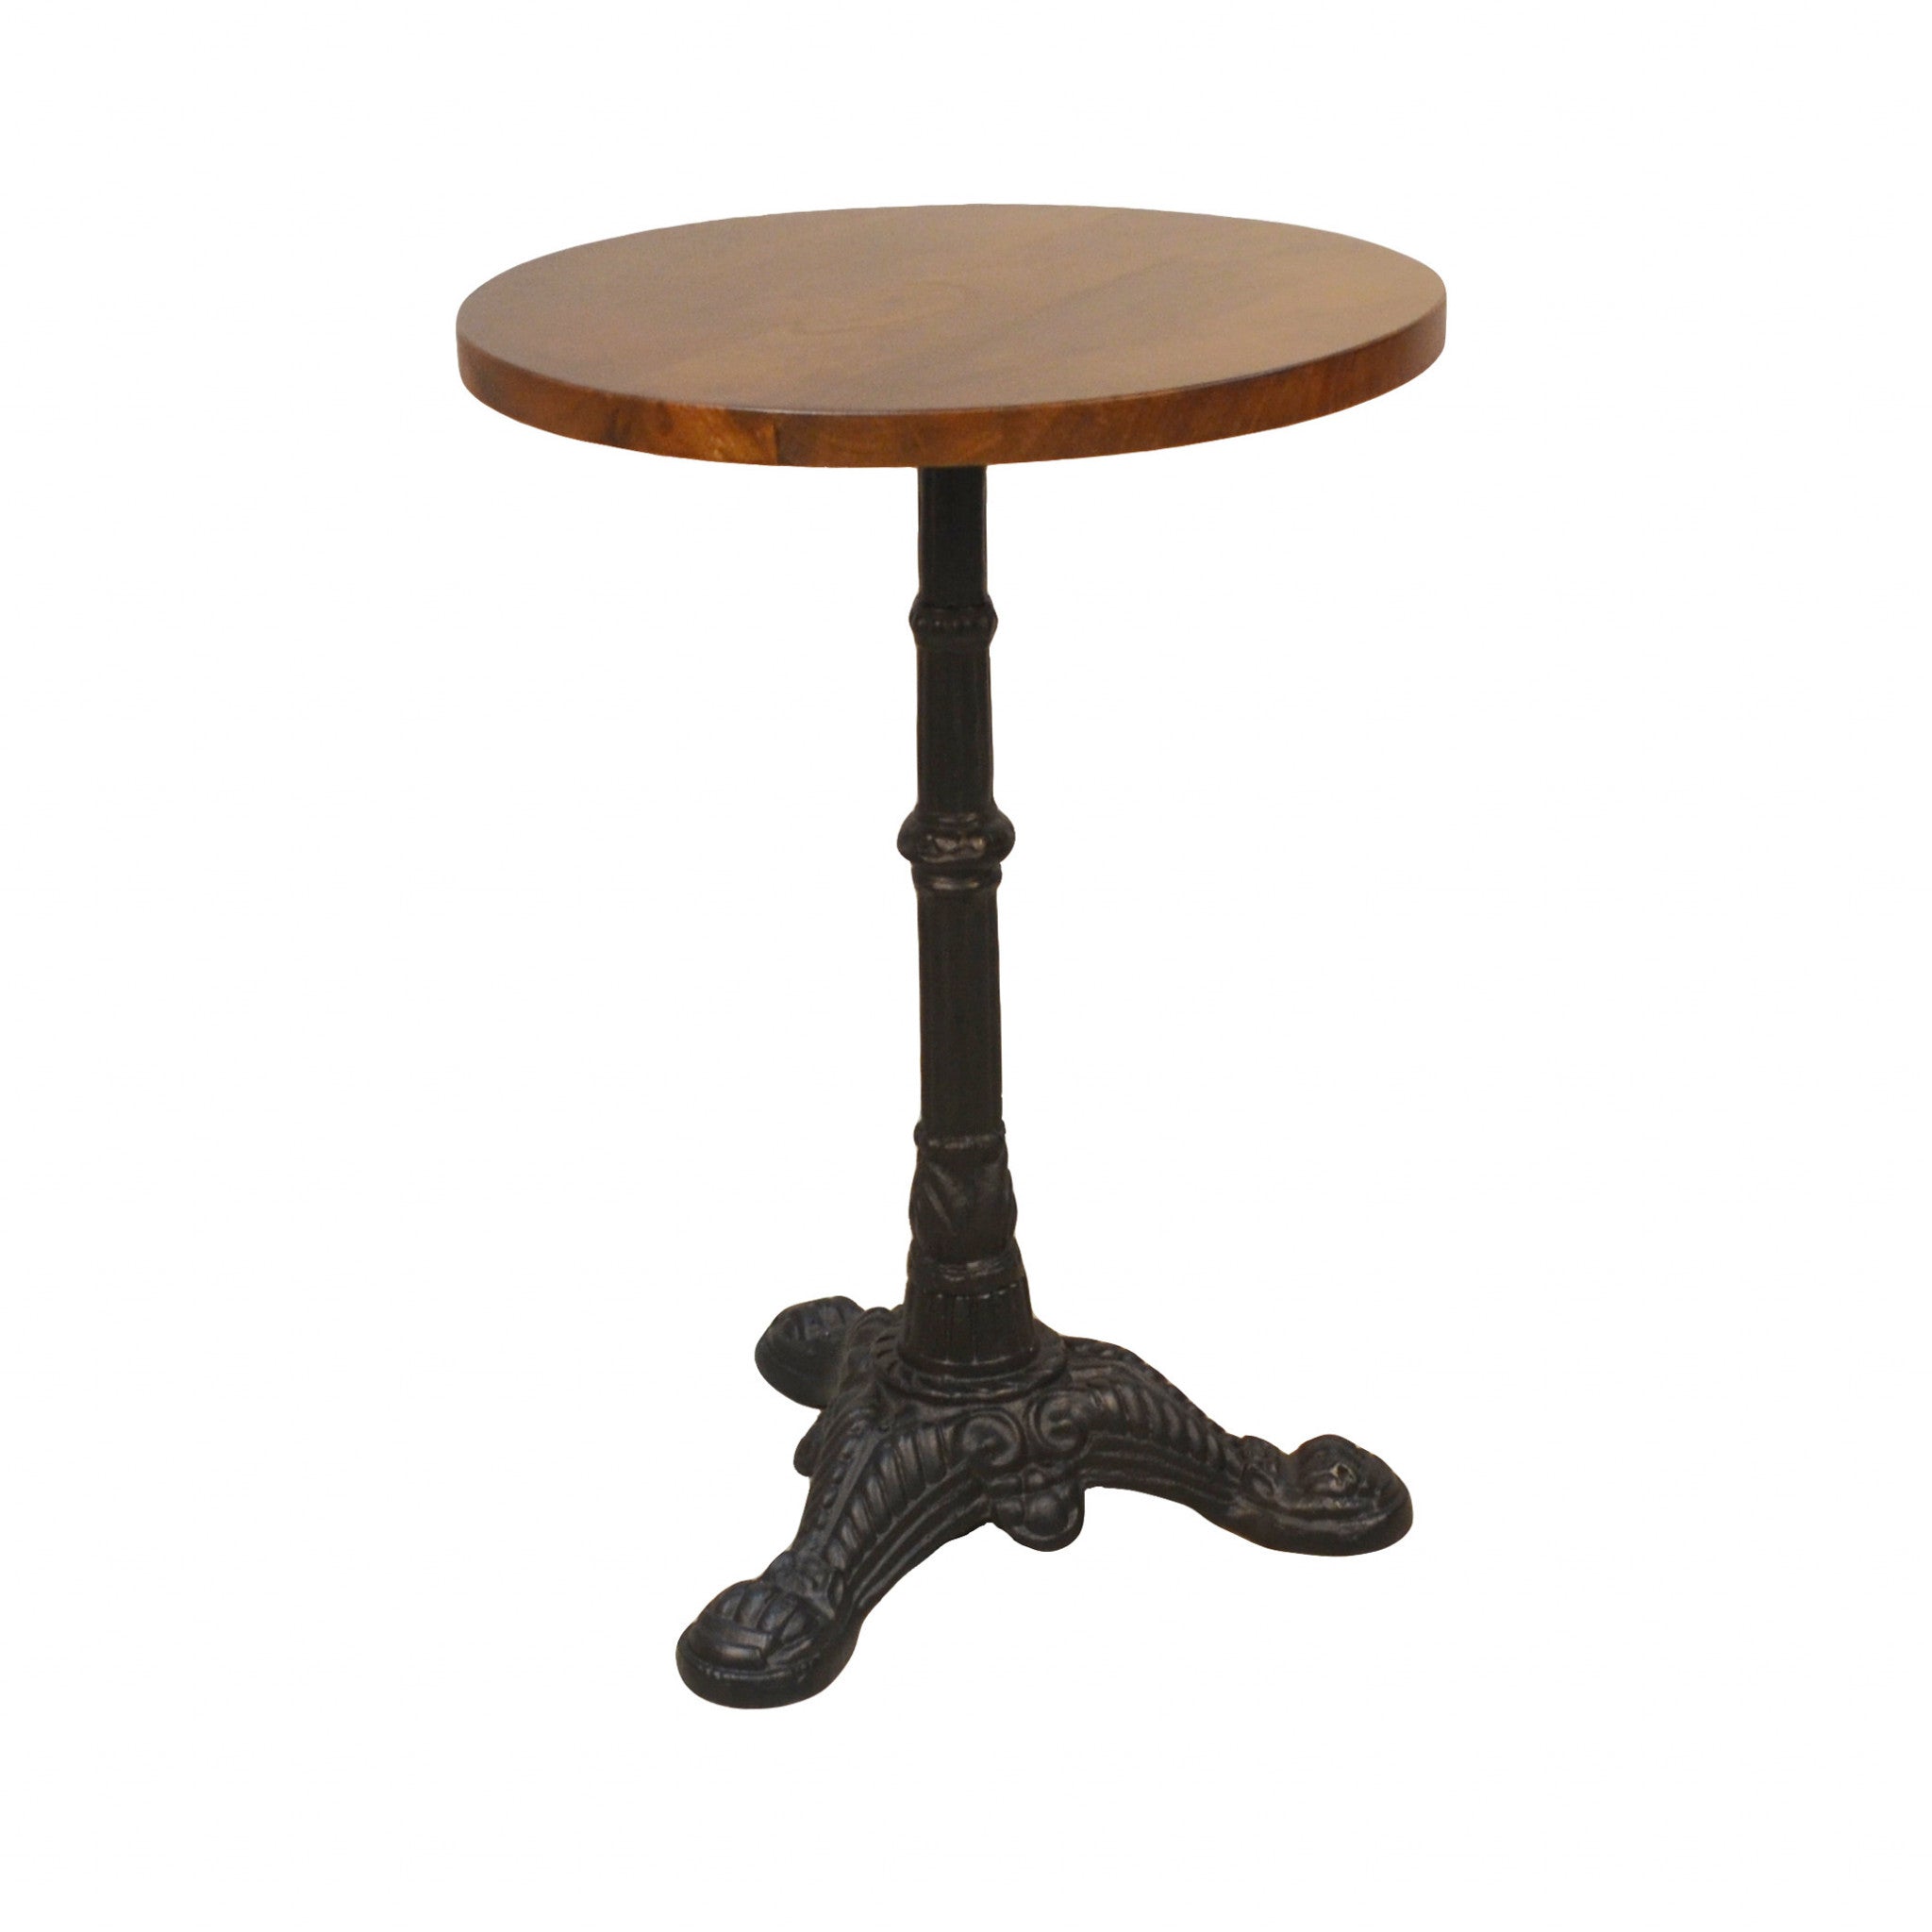 28" Black And Chestnut Solid Wood Round End Table